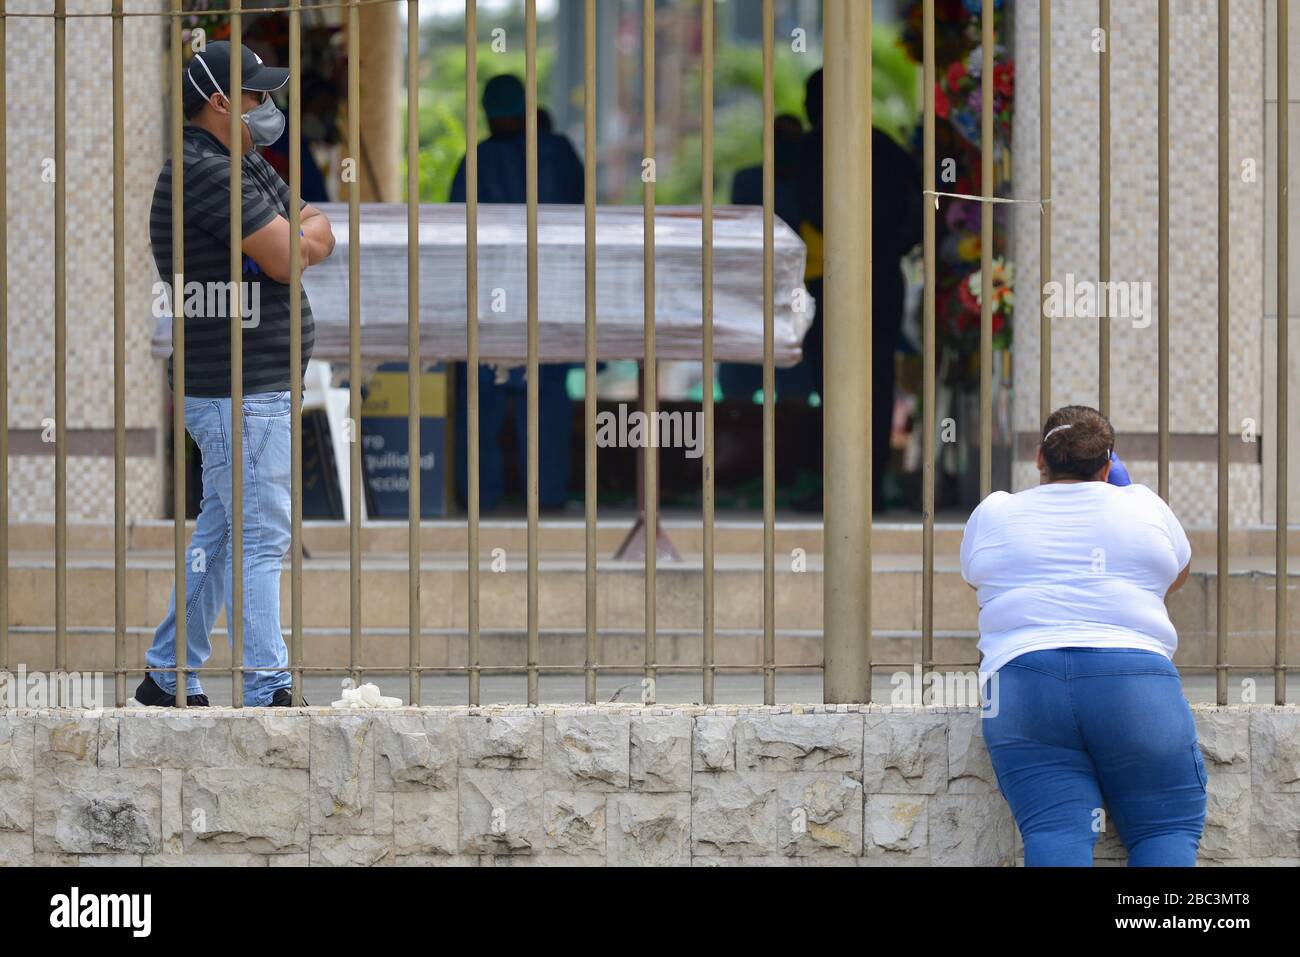 Guayaquil, Ecuador. 02nd Apr, 2020. People wait next to a coffin at the entrance of the cemetery 'Jardines de la Esperanza' (Gardens of Hope). The port city of Guayaquil is the most affected by Covid-19 in Ecuador. Dead bodies lie in the apartments for days, the morgues of the hospitals are overcrowded. The city administration requested four refrigerated containers in which the corpses can be temporarily stored. Credit: Marcos Pin Mendez/dpa/Alamy Live News Stock Photo